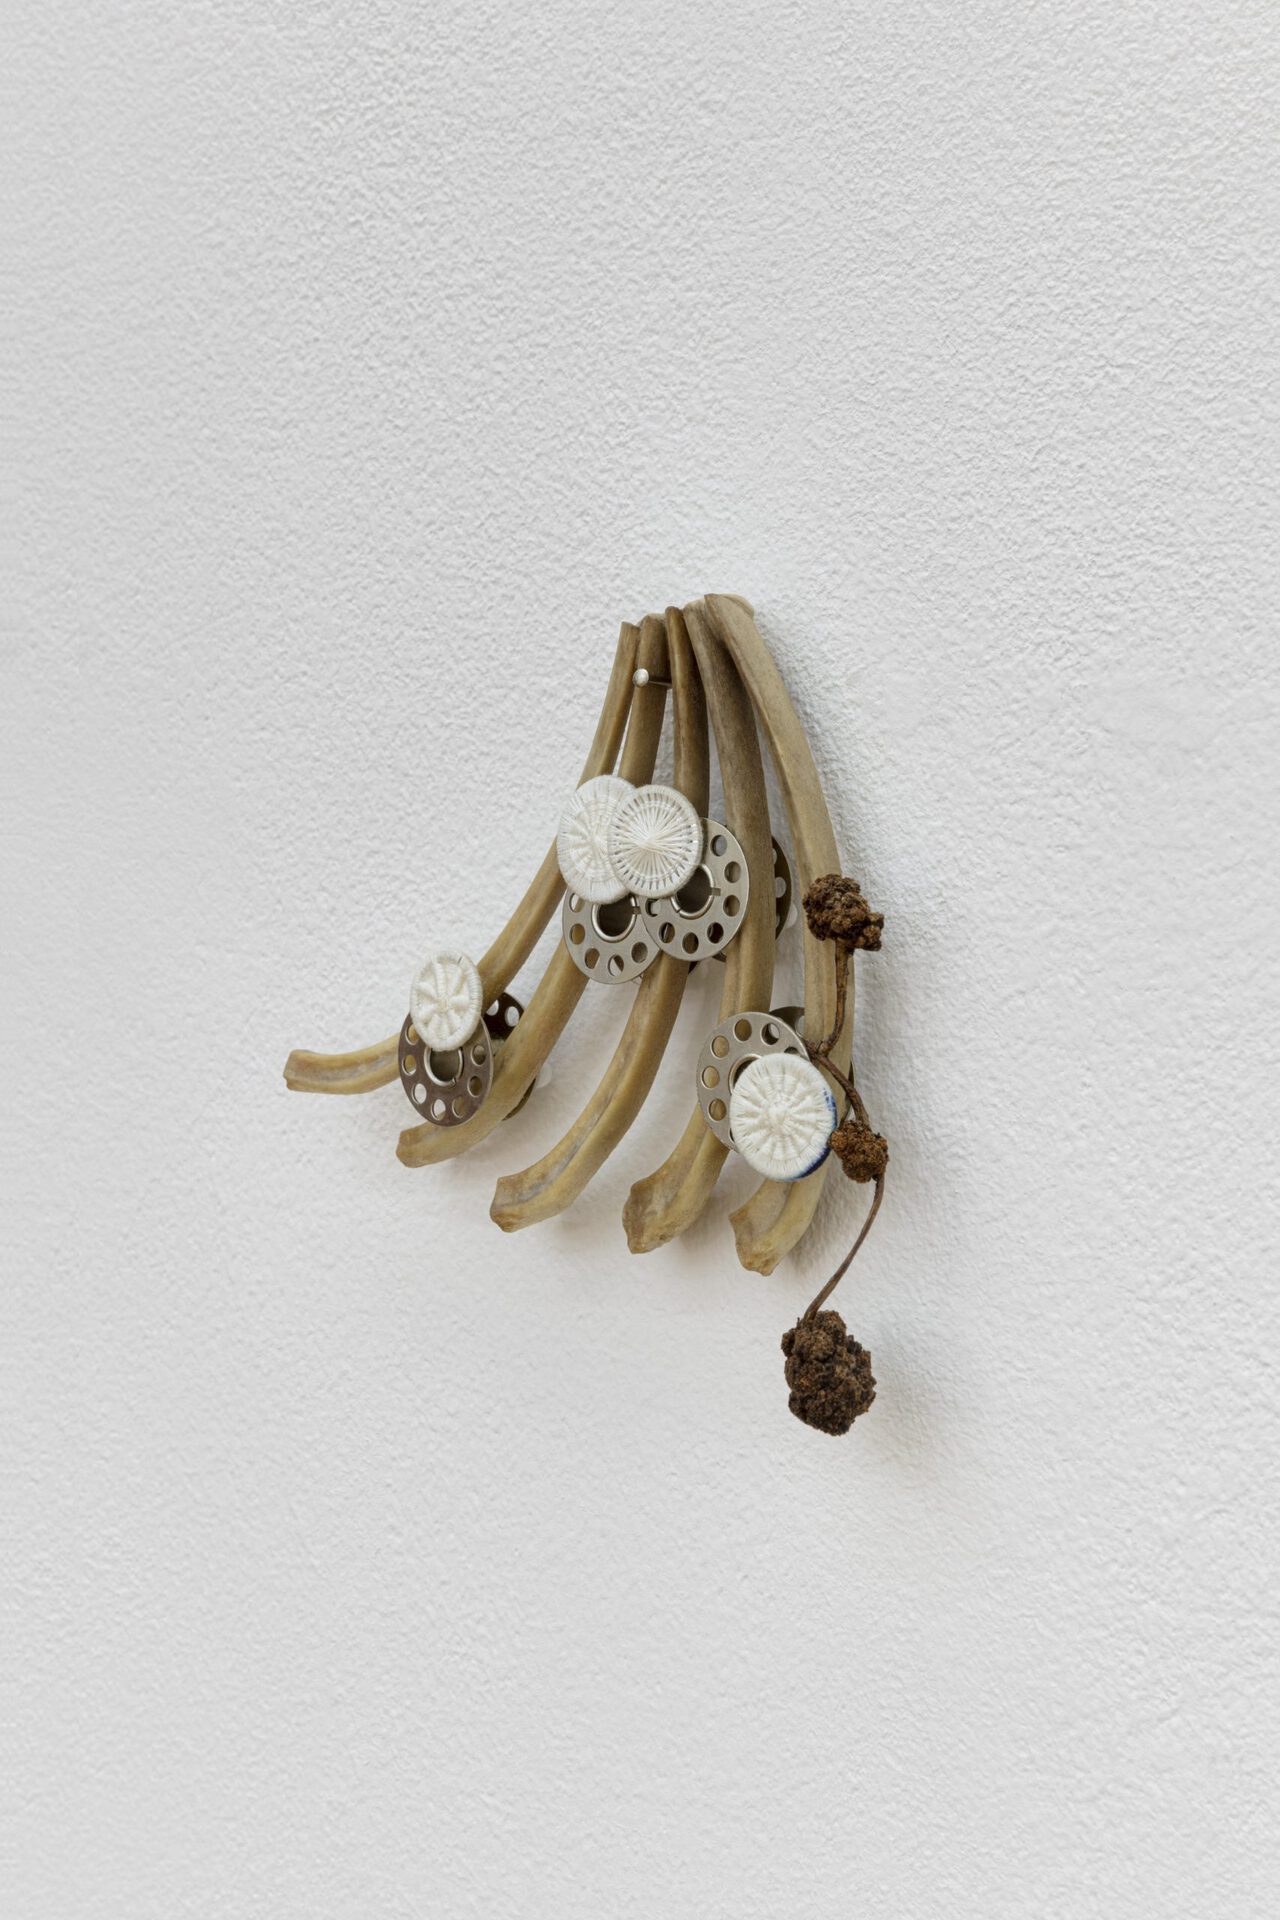 David Fesl, Untitled, 2021, lamb ribs, sewing machine coils, cotton thread, bedcloth buttons, ink and willow blossoms, 11 × 12.6 × 3.3 cm